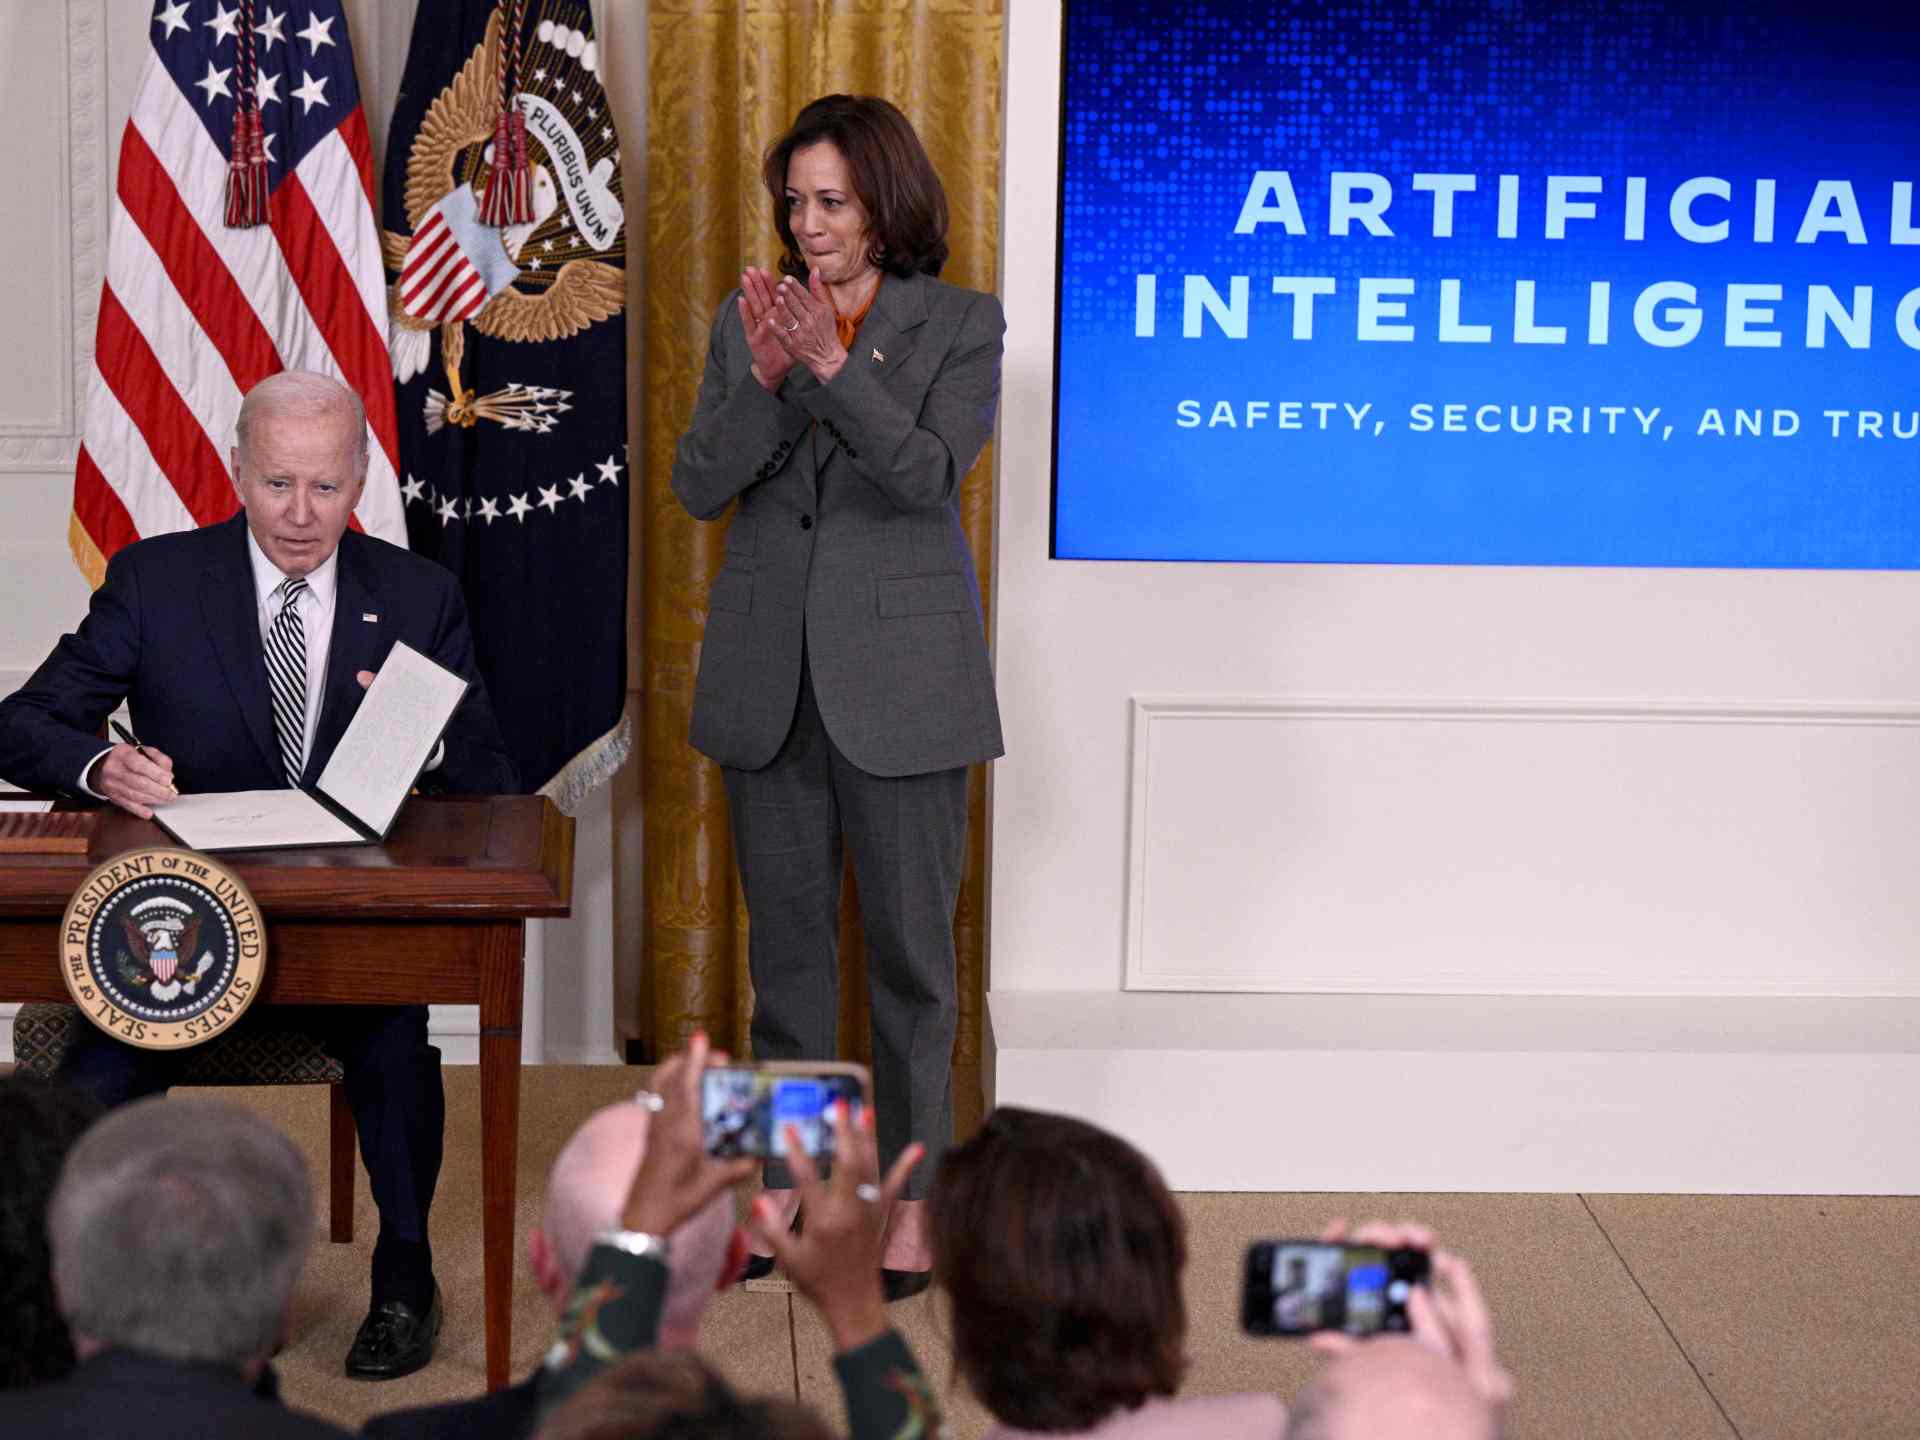 Biden announces ‘strongest’ regulations yet to ensure safety of AI